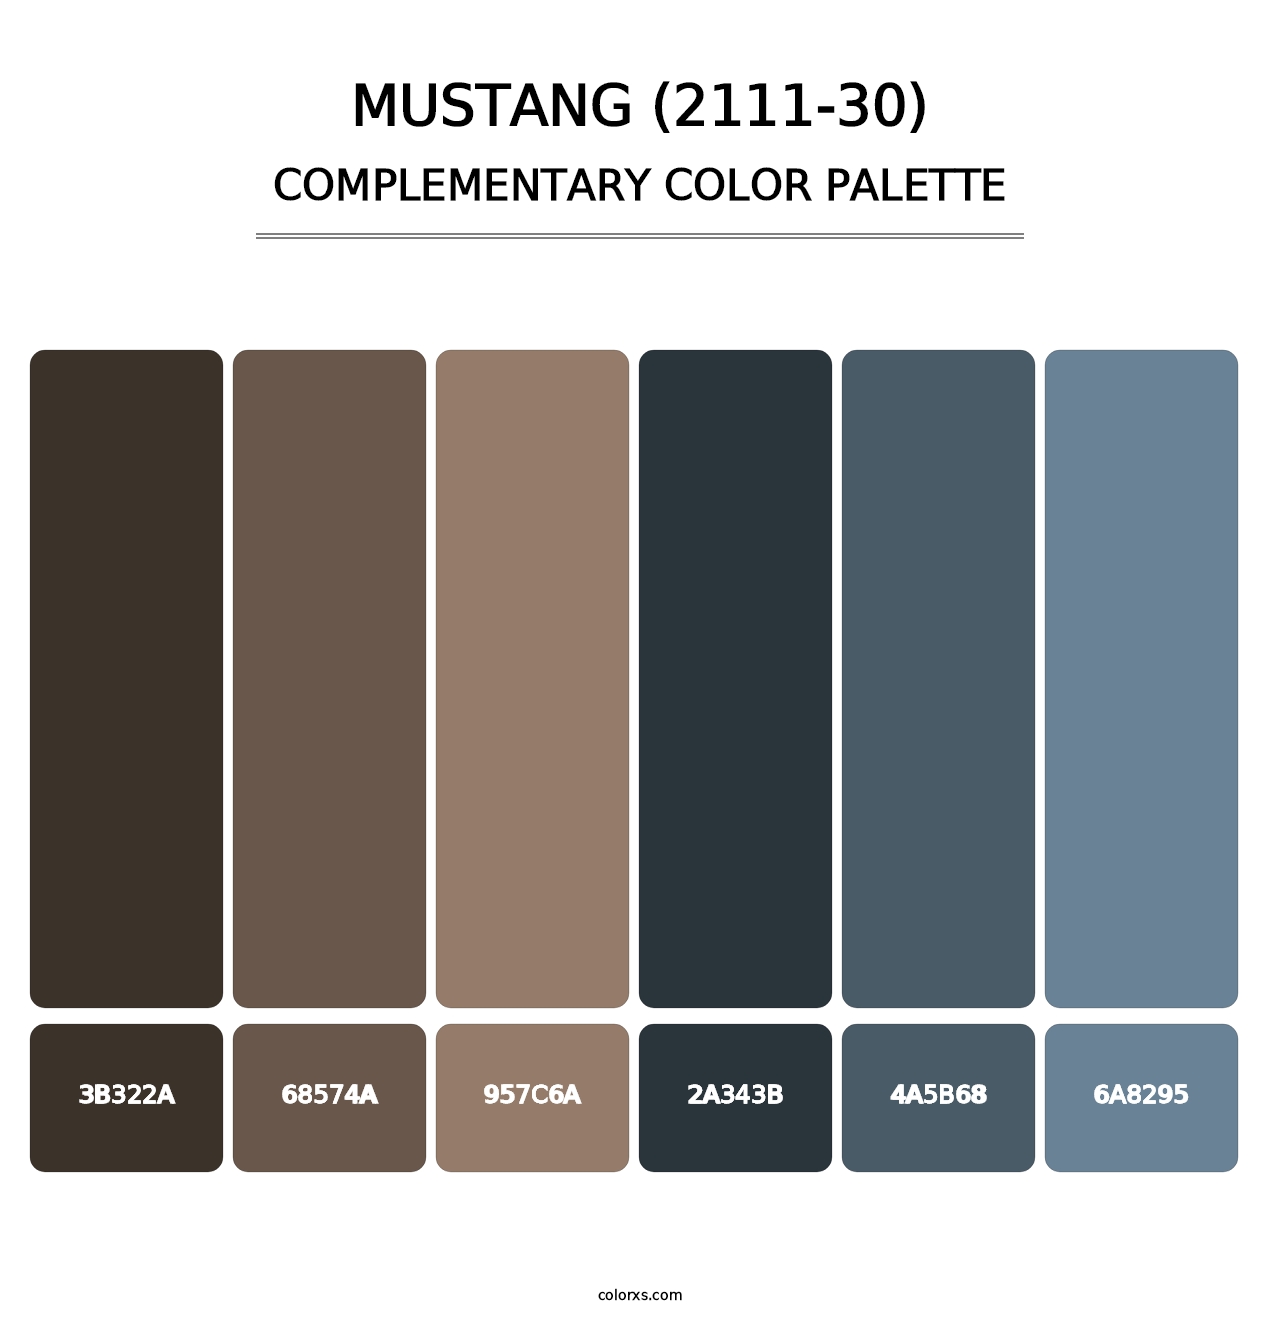 Mustang (2111-30) - Complementary Color Palette